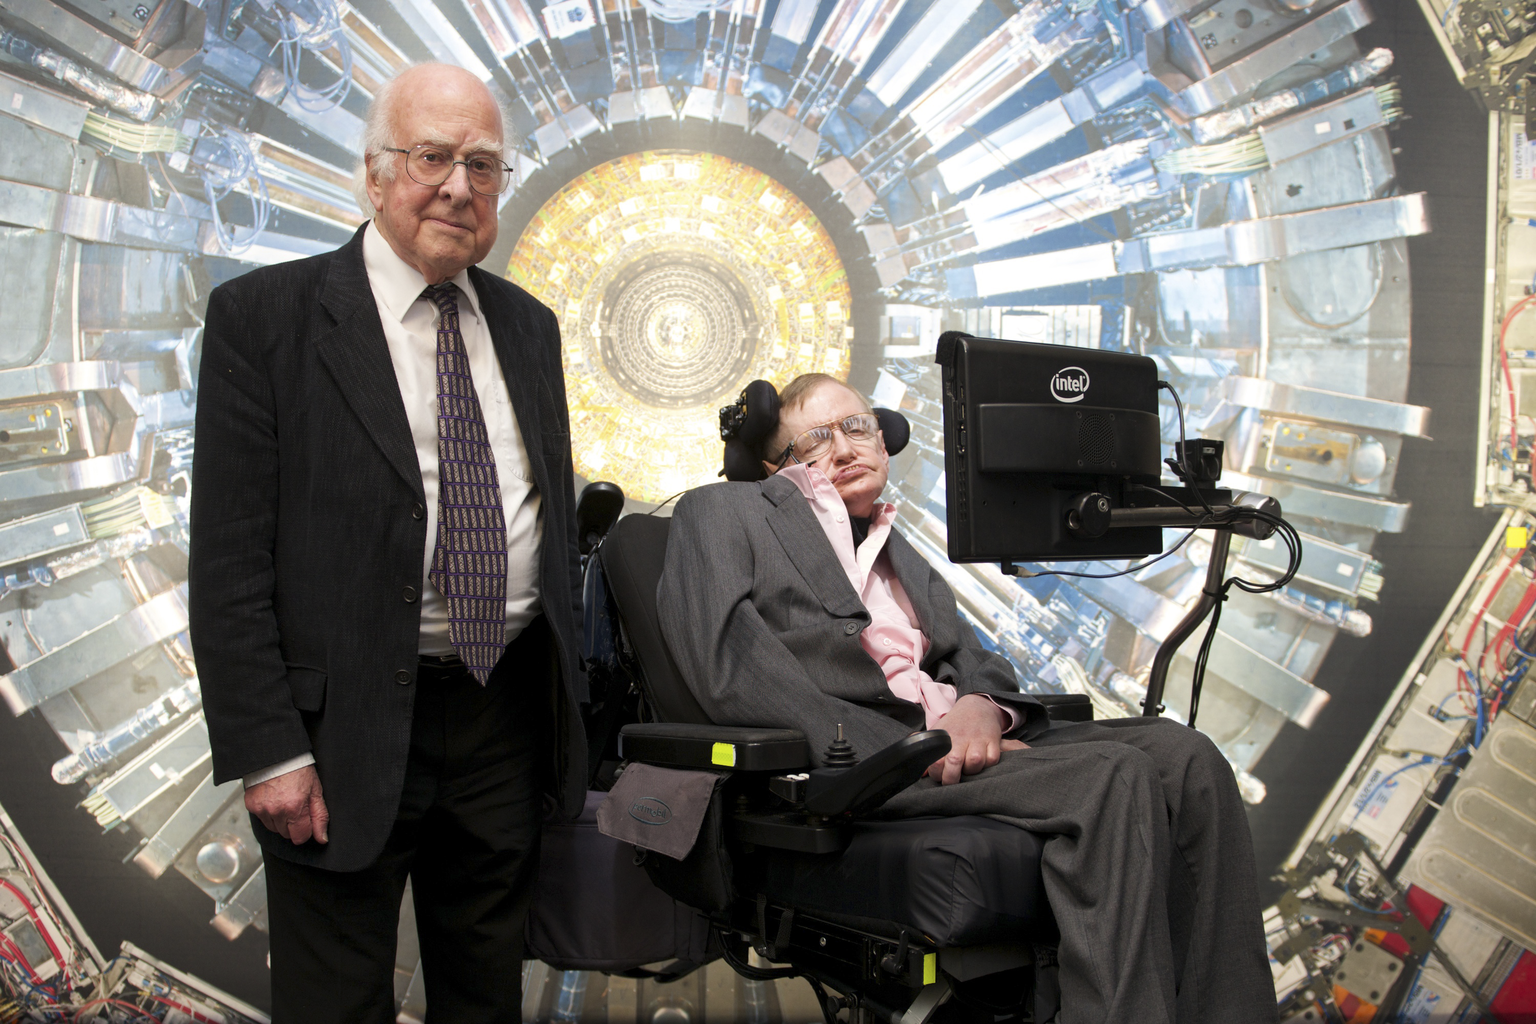 Peter Higgs and Stephen Hawking in the Science Museum's Collider exhibition in 2013.